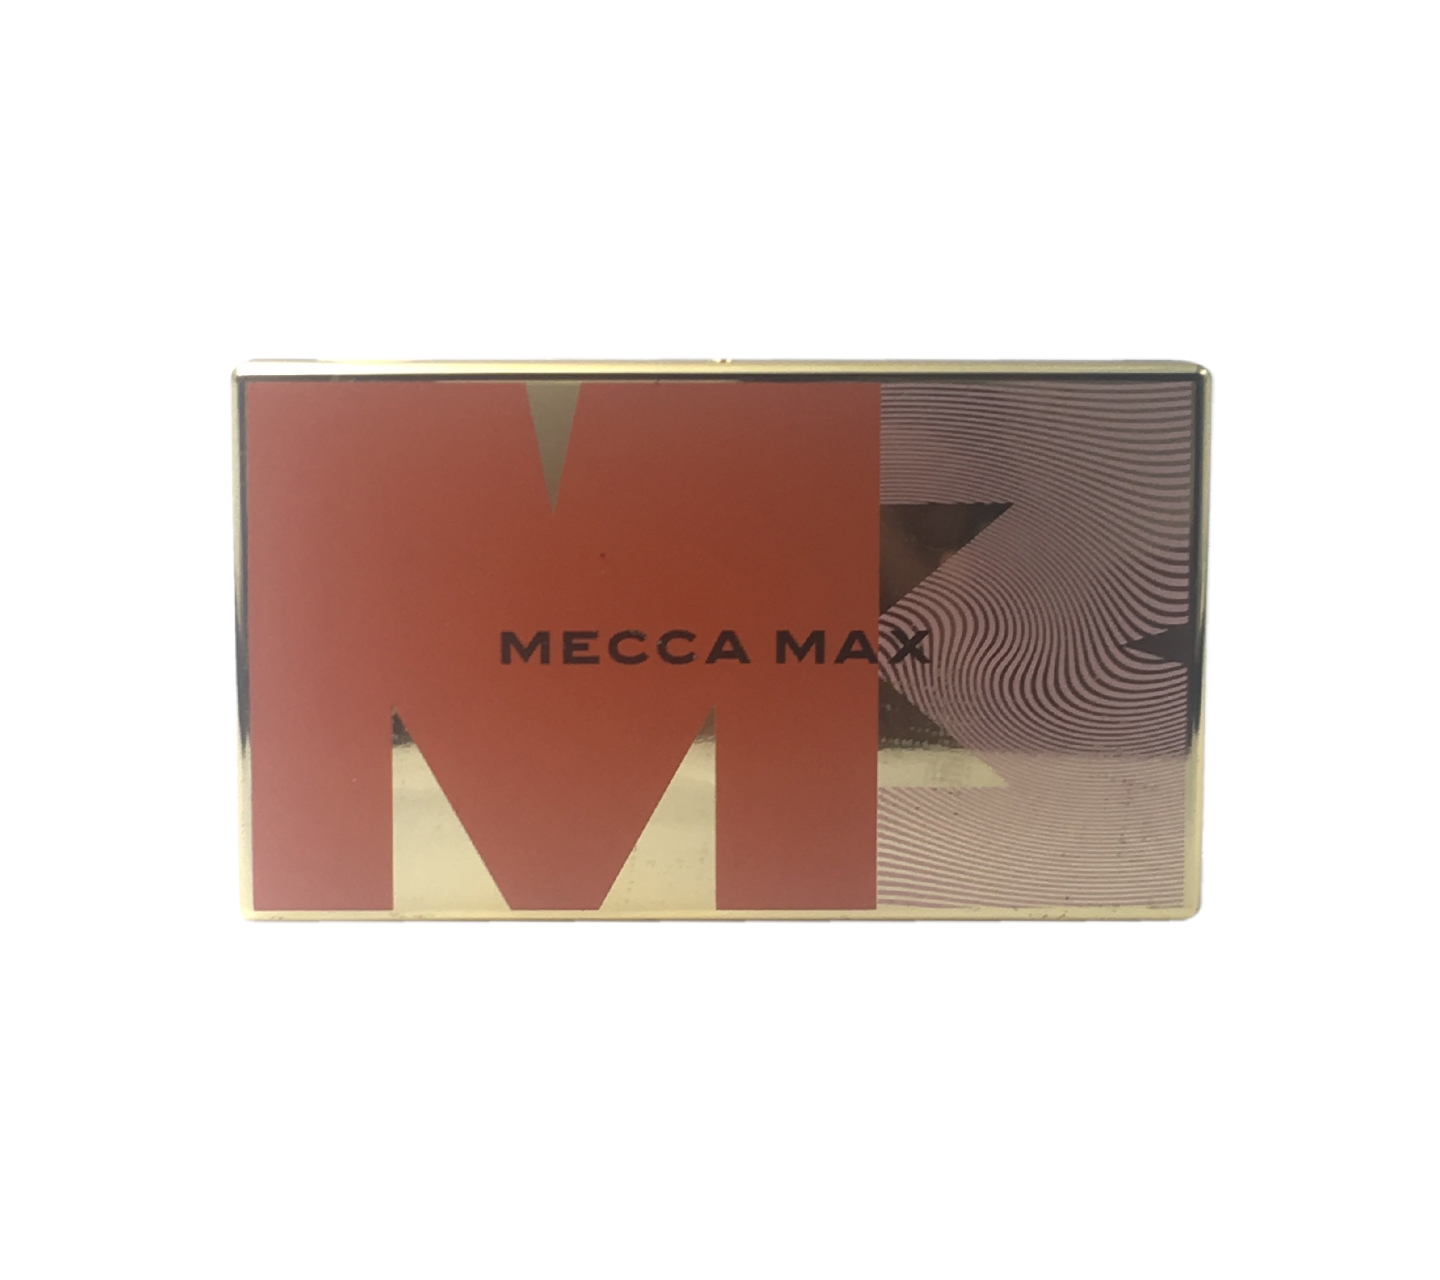 Mecca Max Triple Threat Cream Face Shaper Sets And Palette